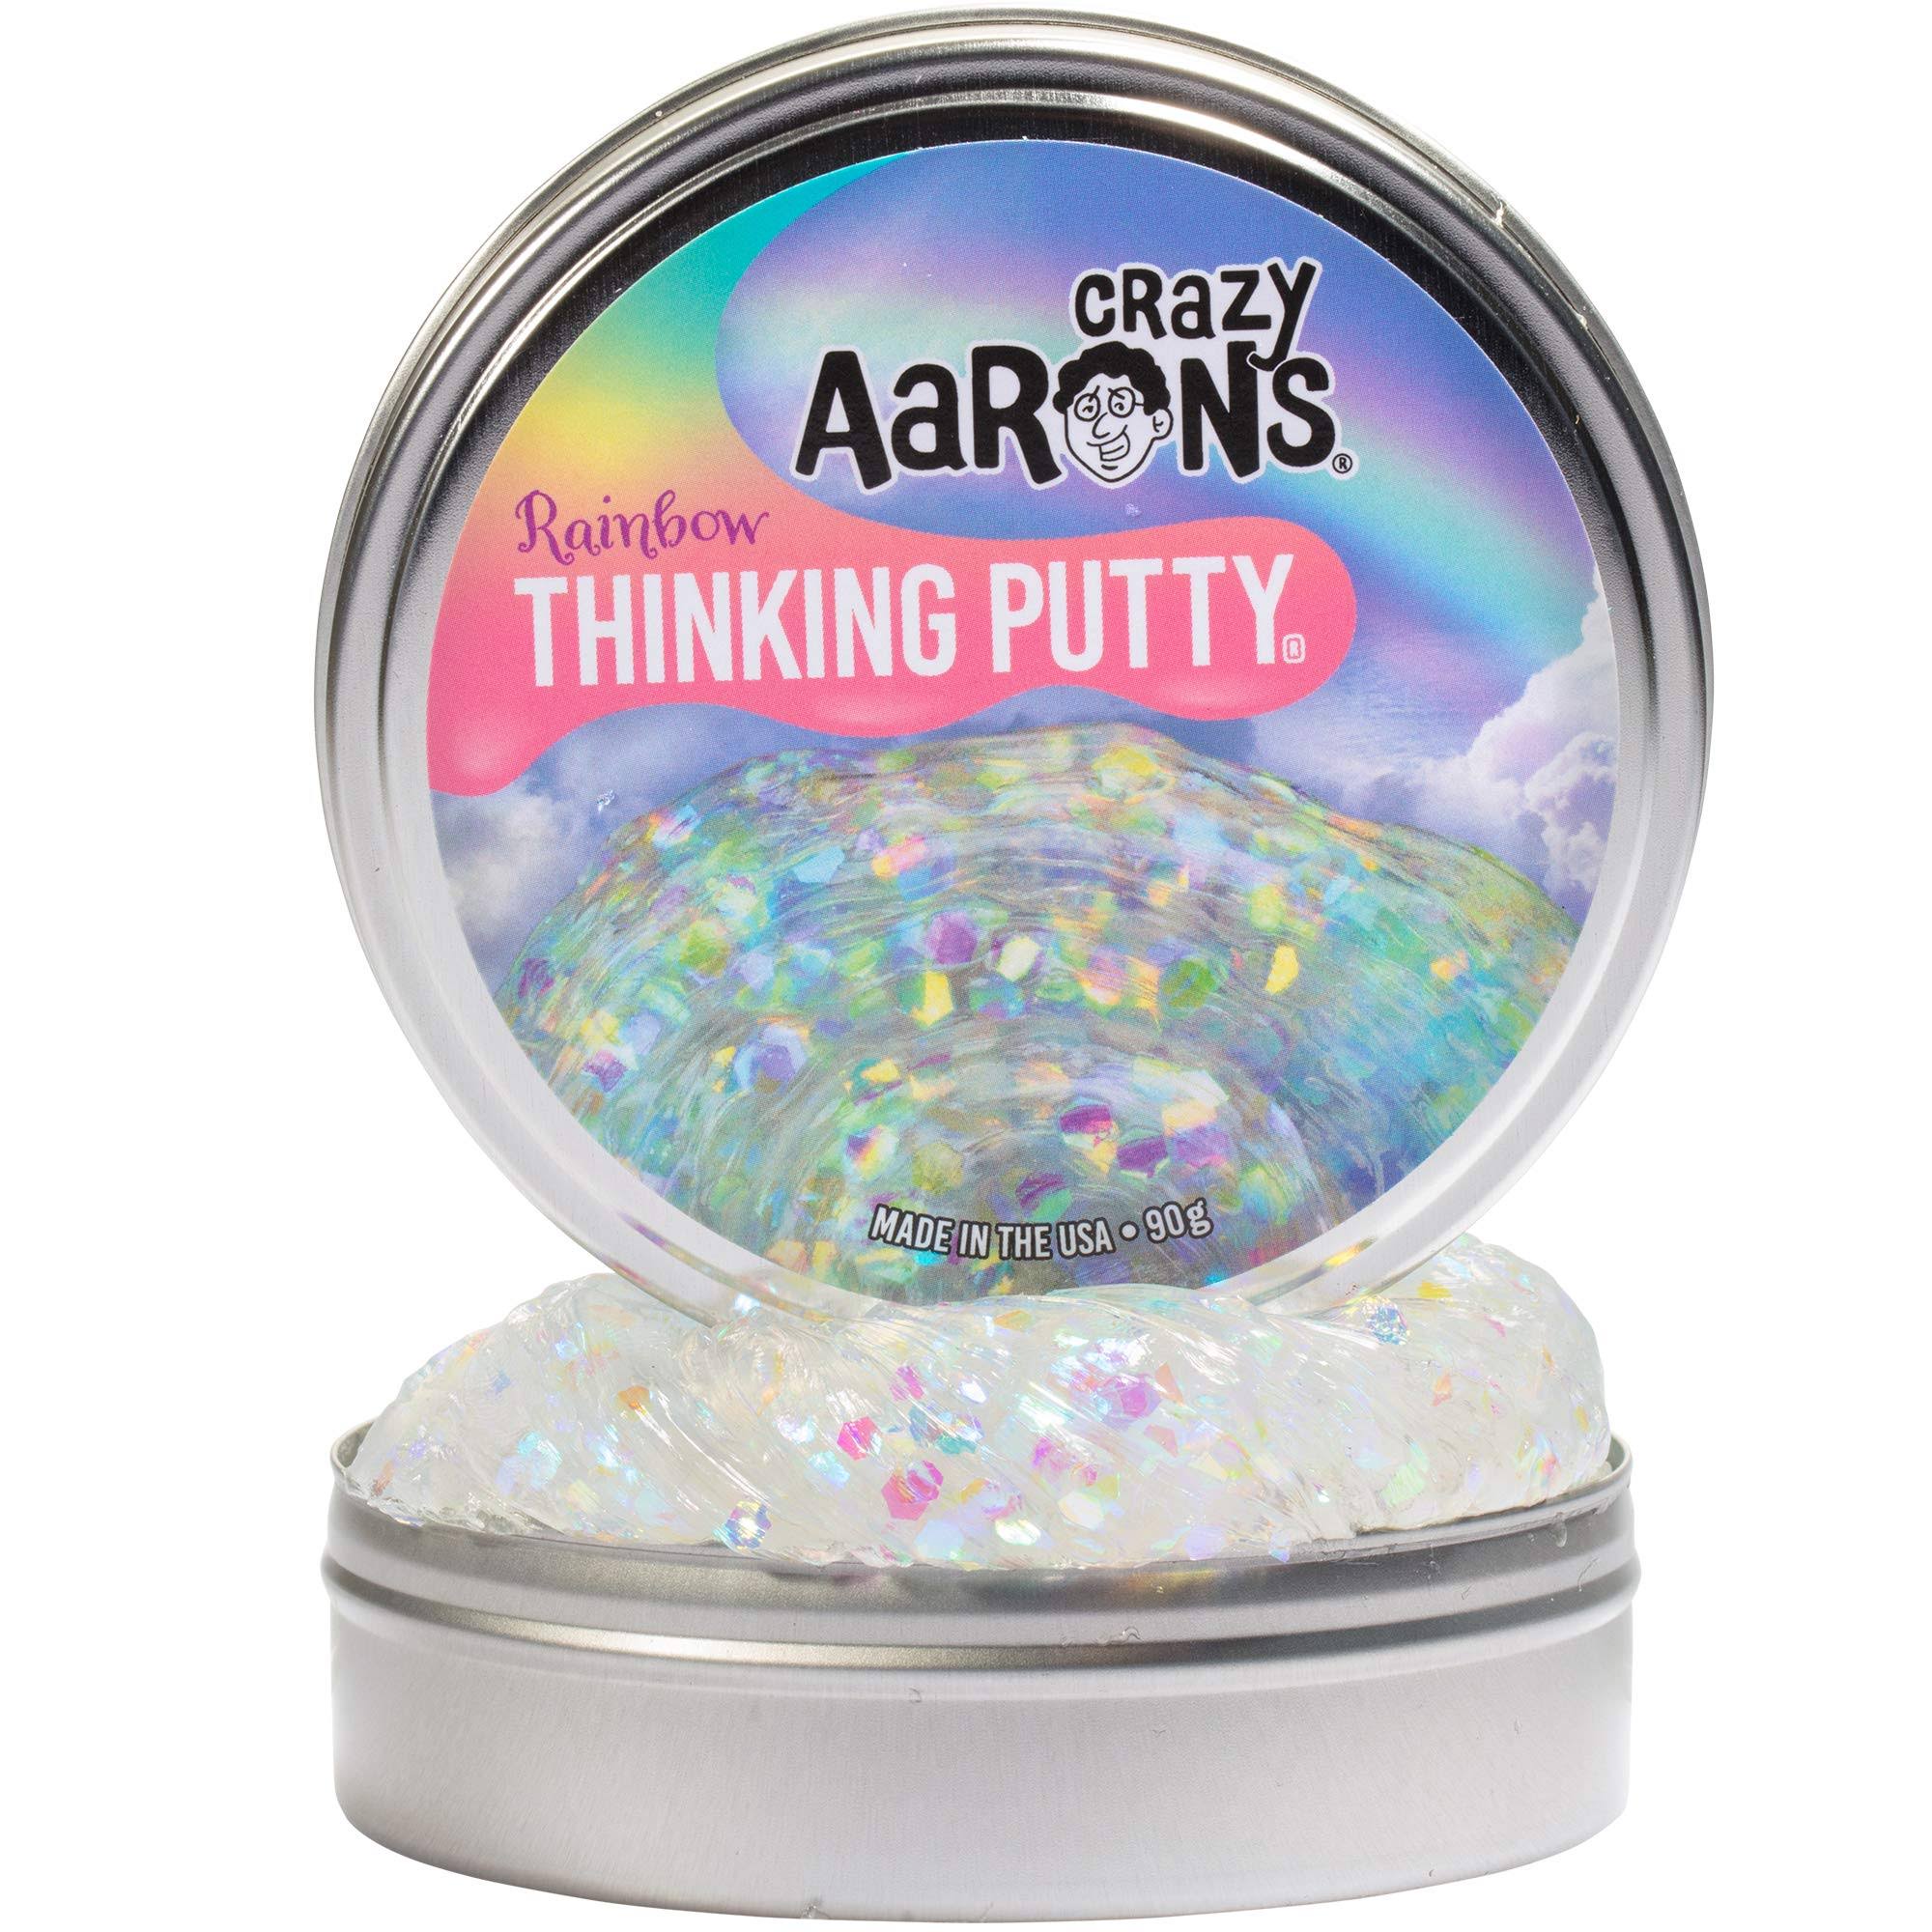 Crazy-Aaron's-Thinking-Putty-ScentSory-Putty-Scoopberry